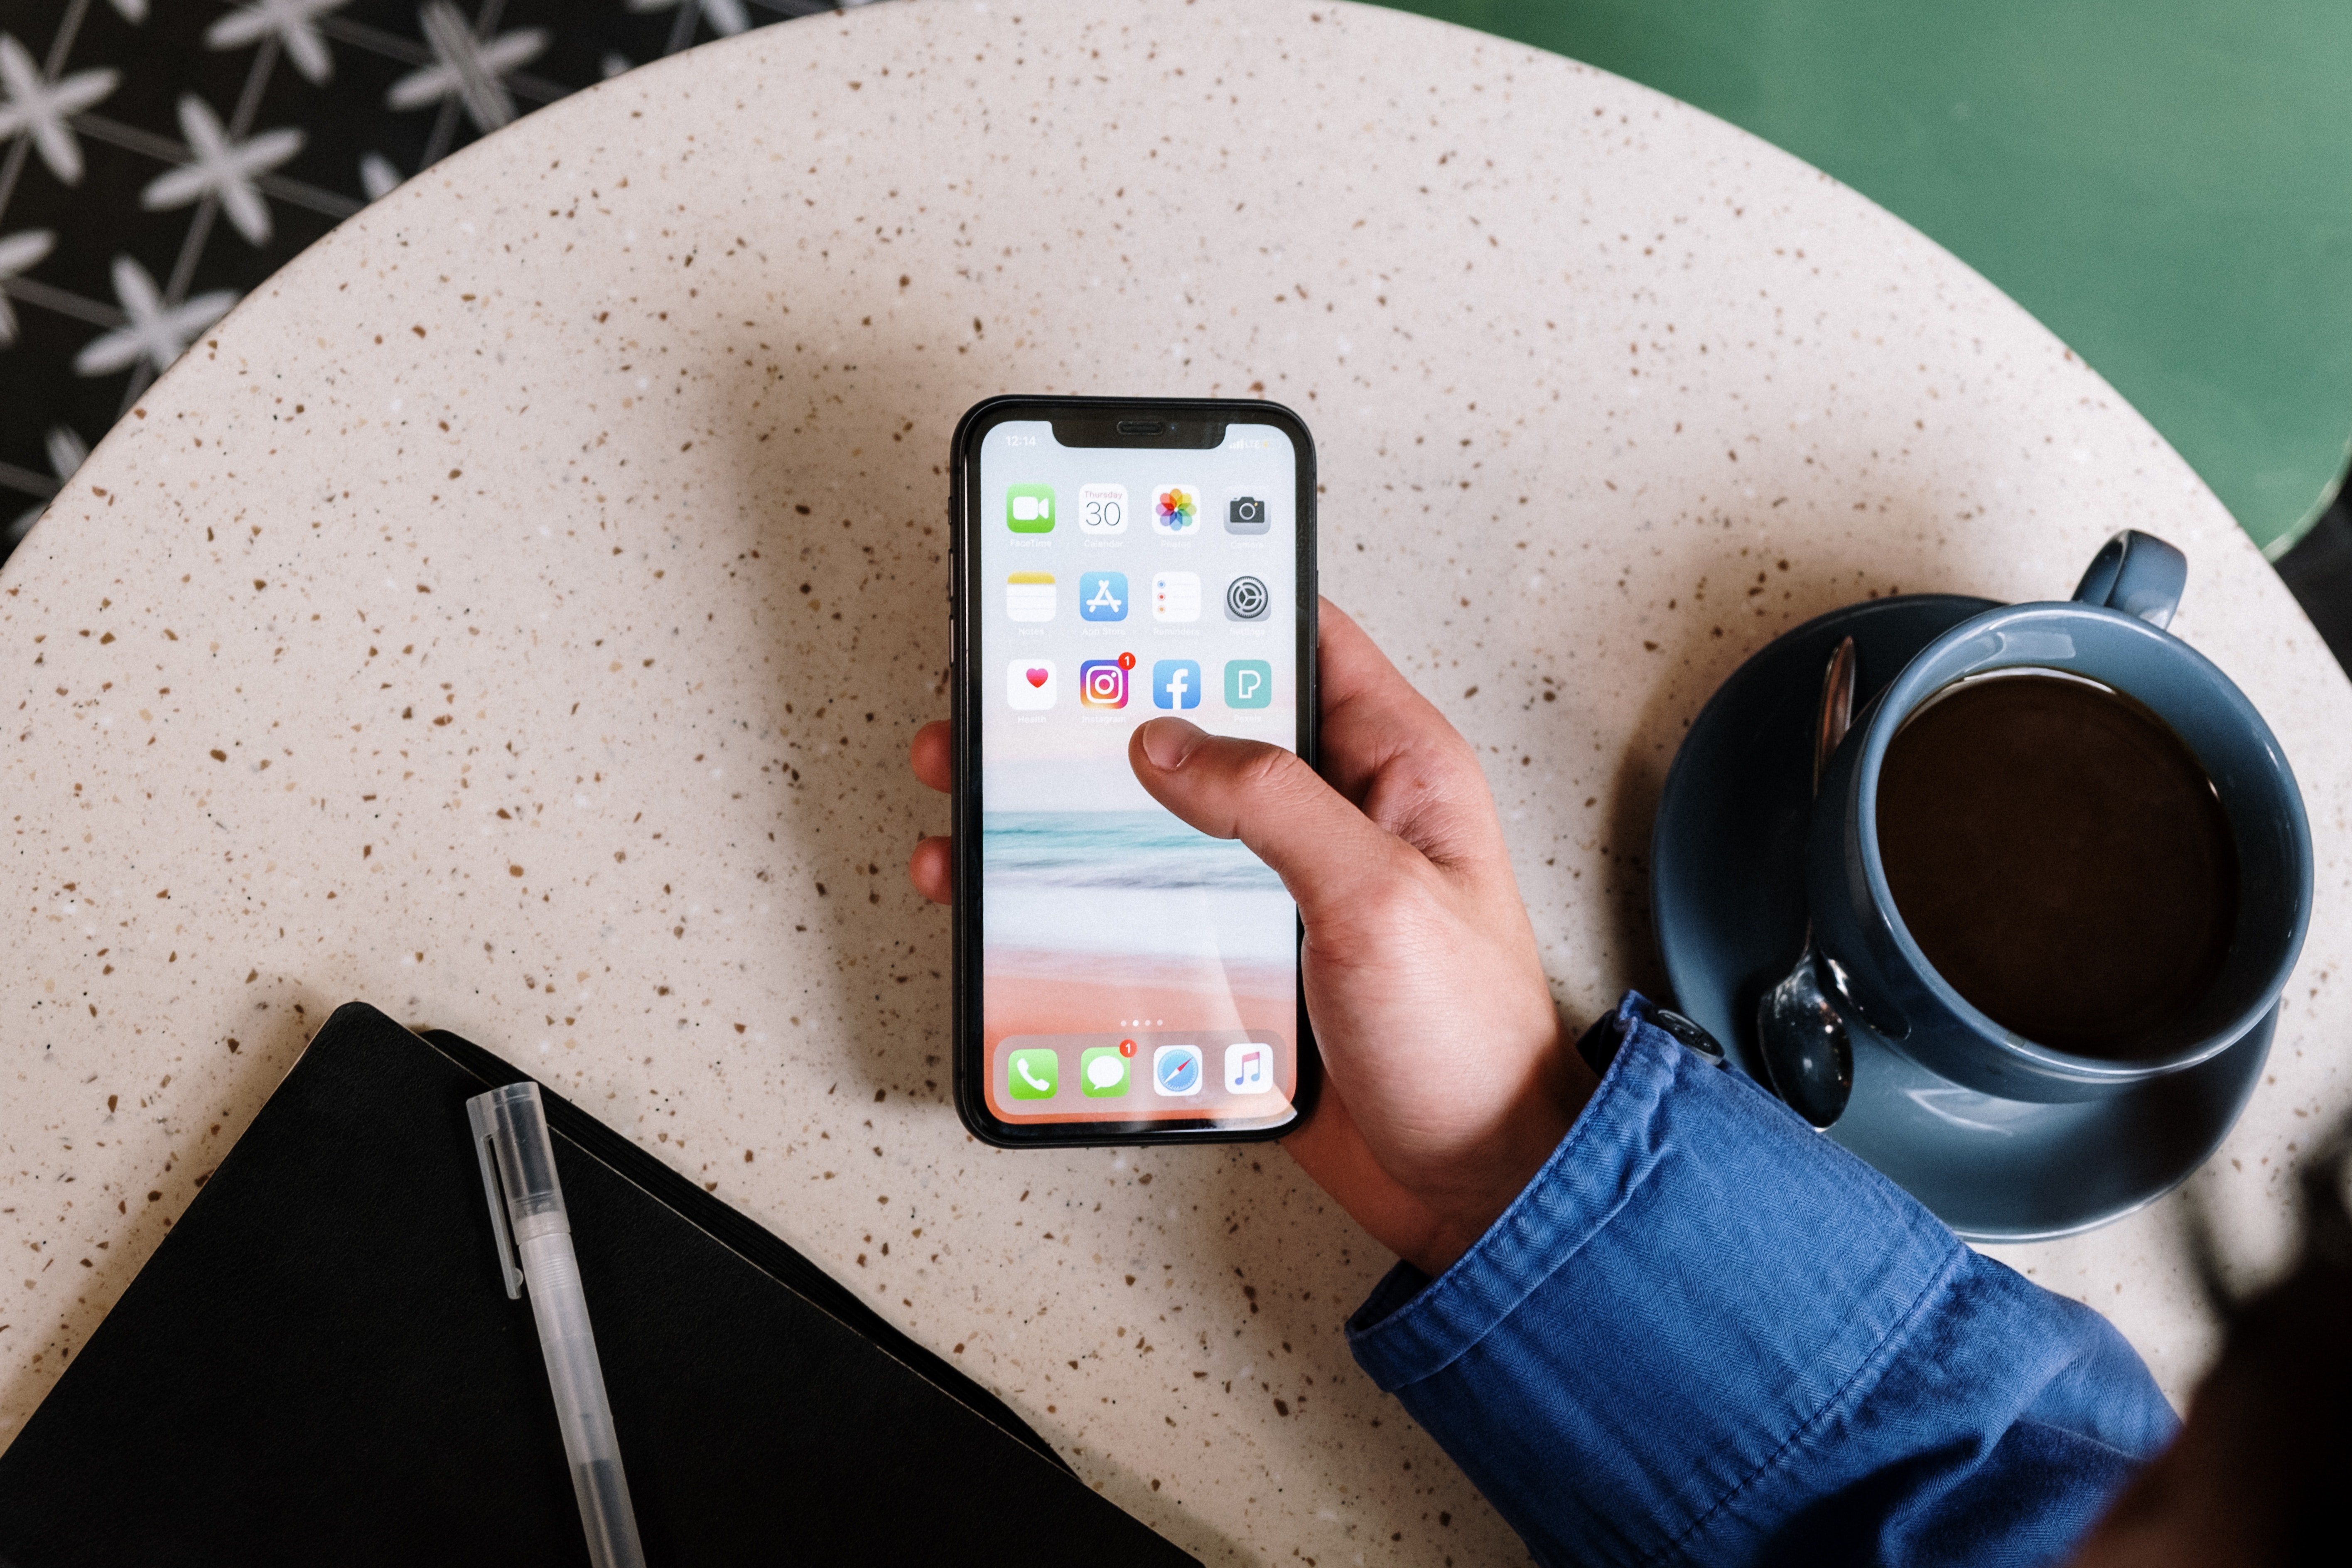 A hand holding a cellphone next to a cup of coffee | Photo: Pexels